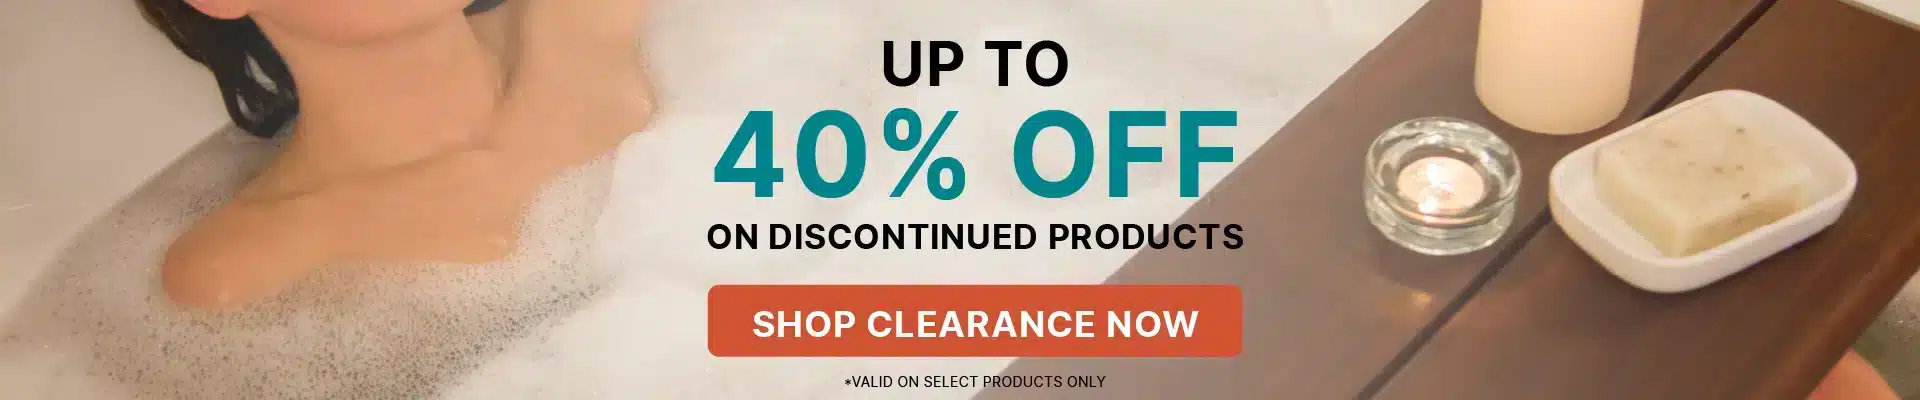 Up to 40% off on discontinued products/ Click the image to shop now.